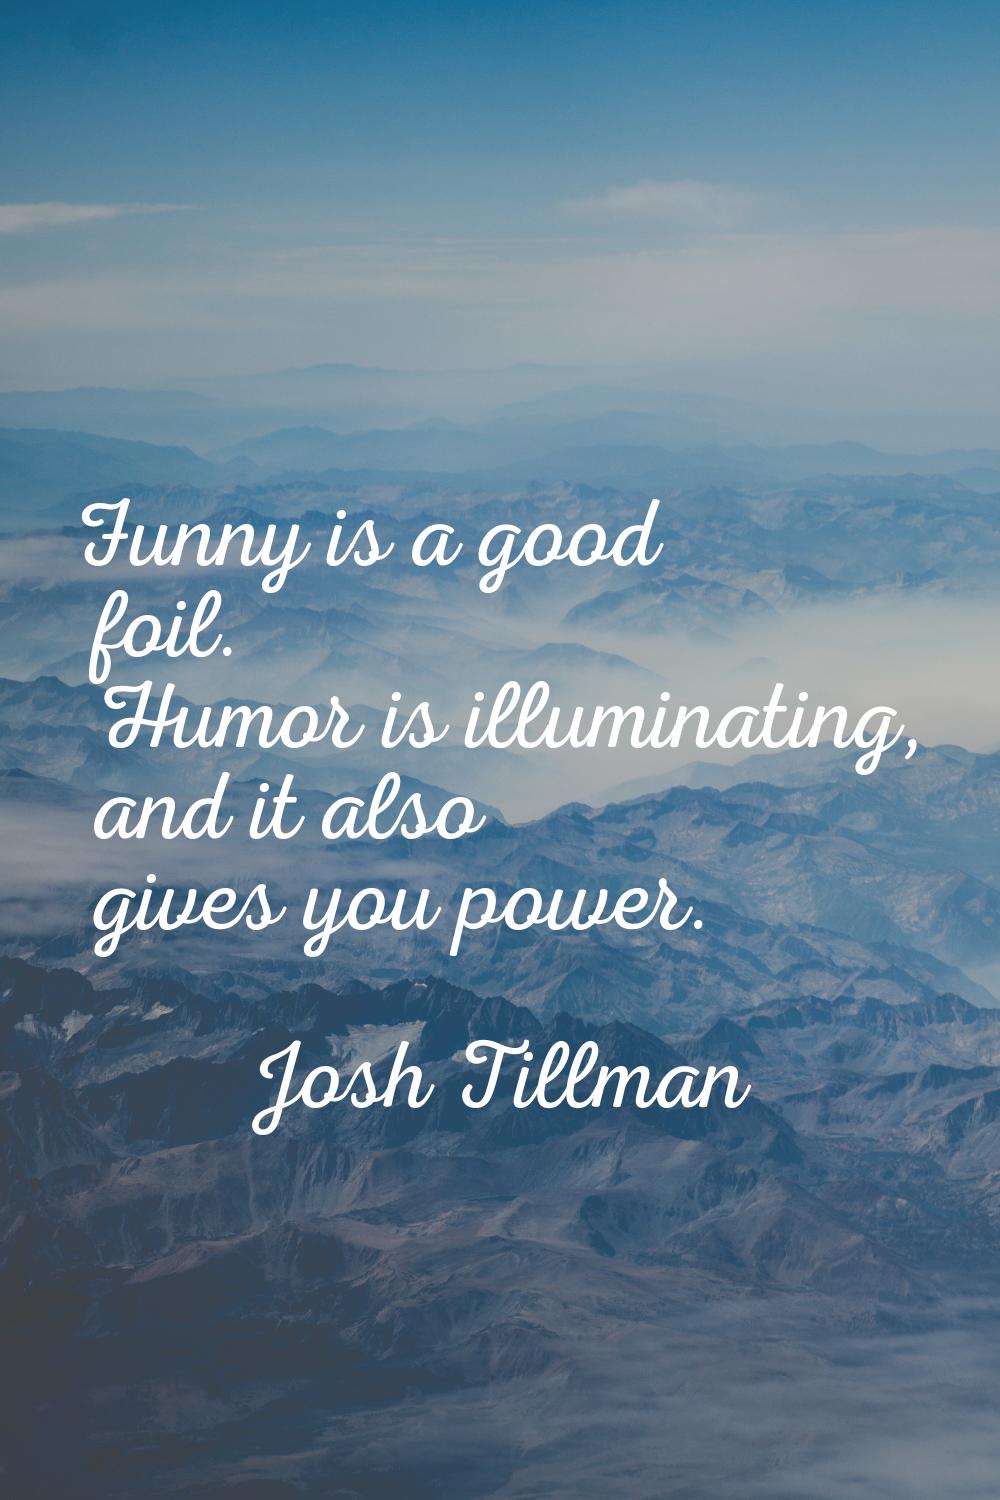 Funny is a good foil. Humor is illuminating, and it also gives you power.